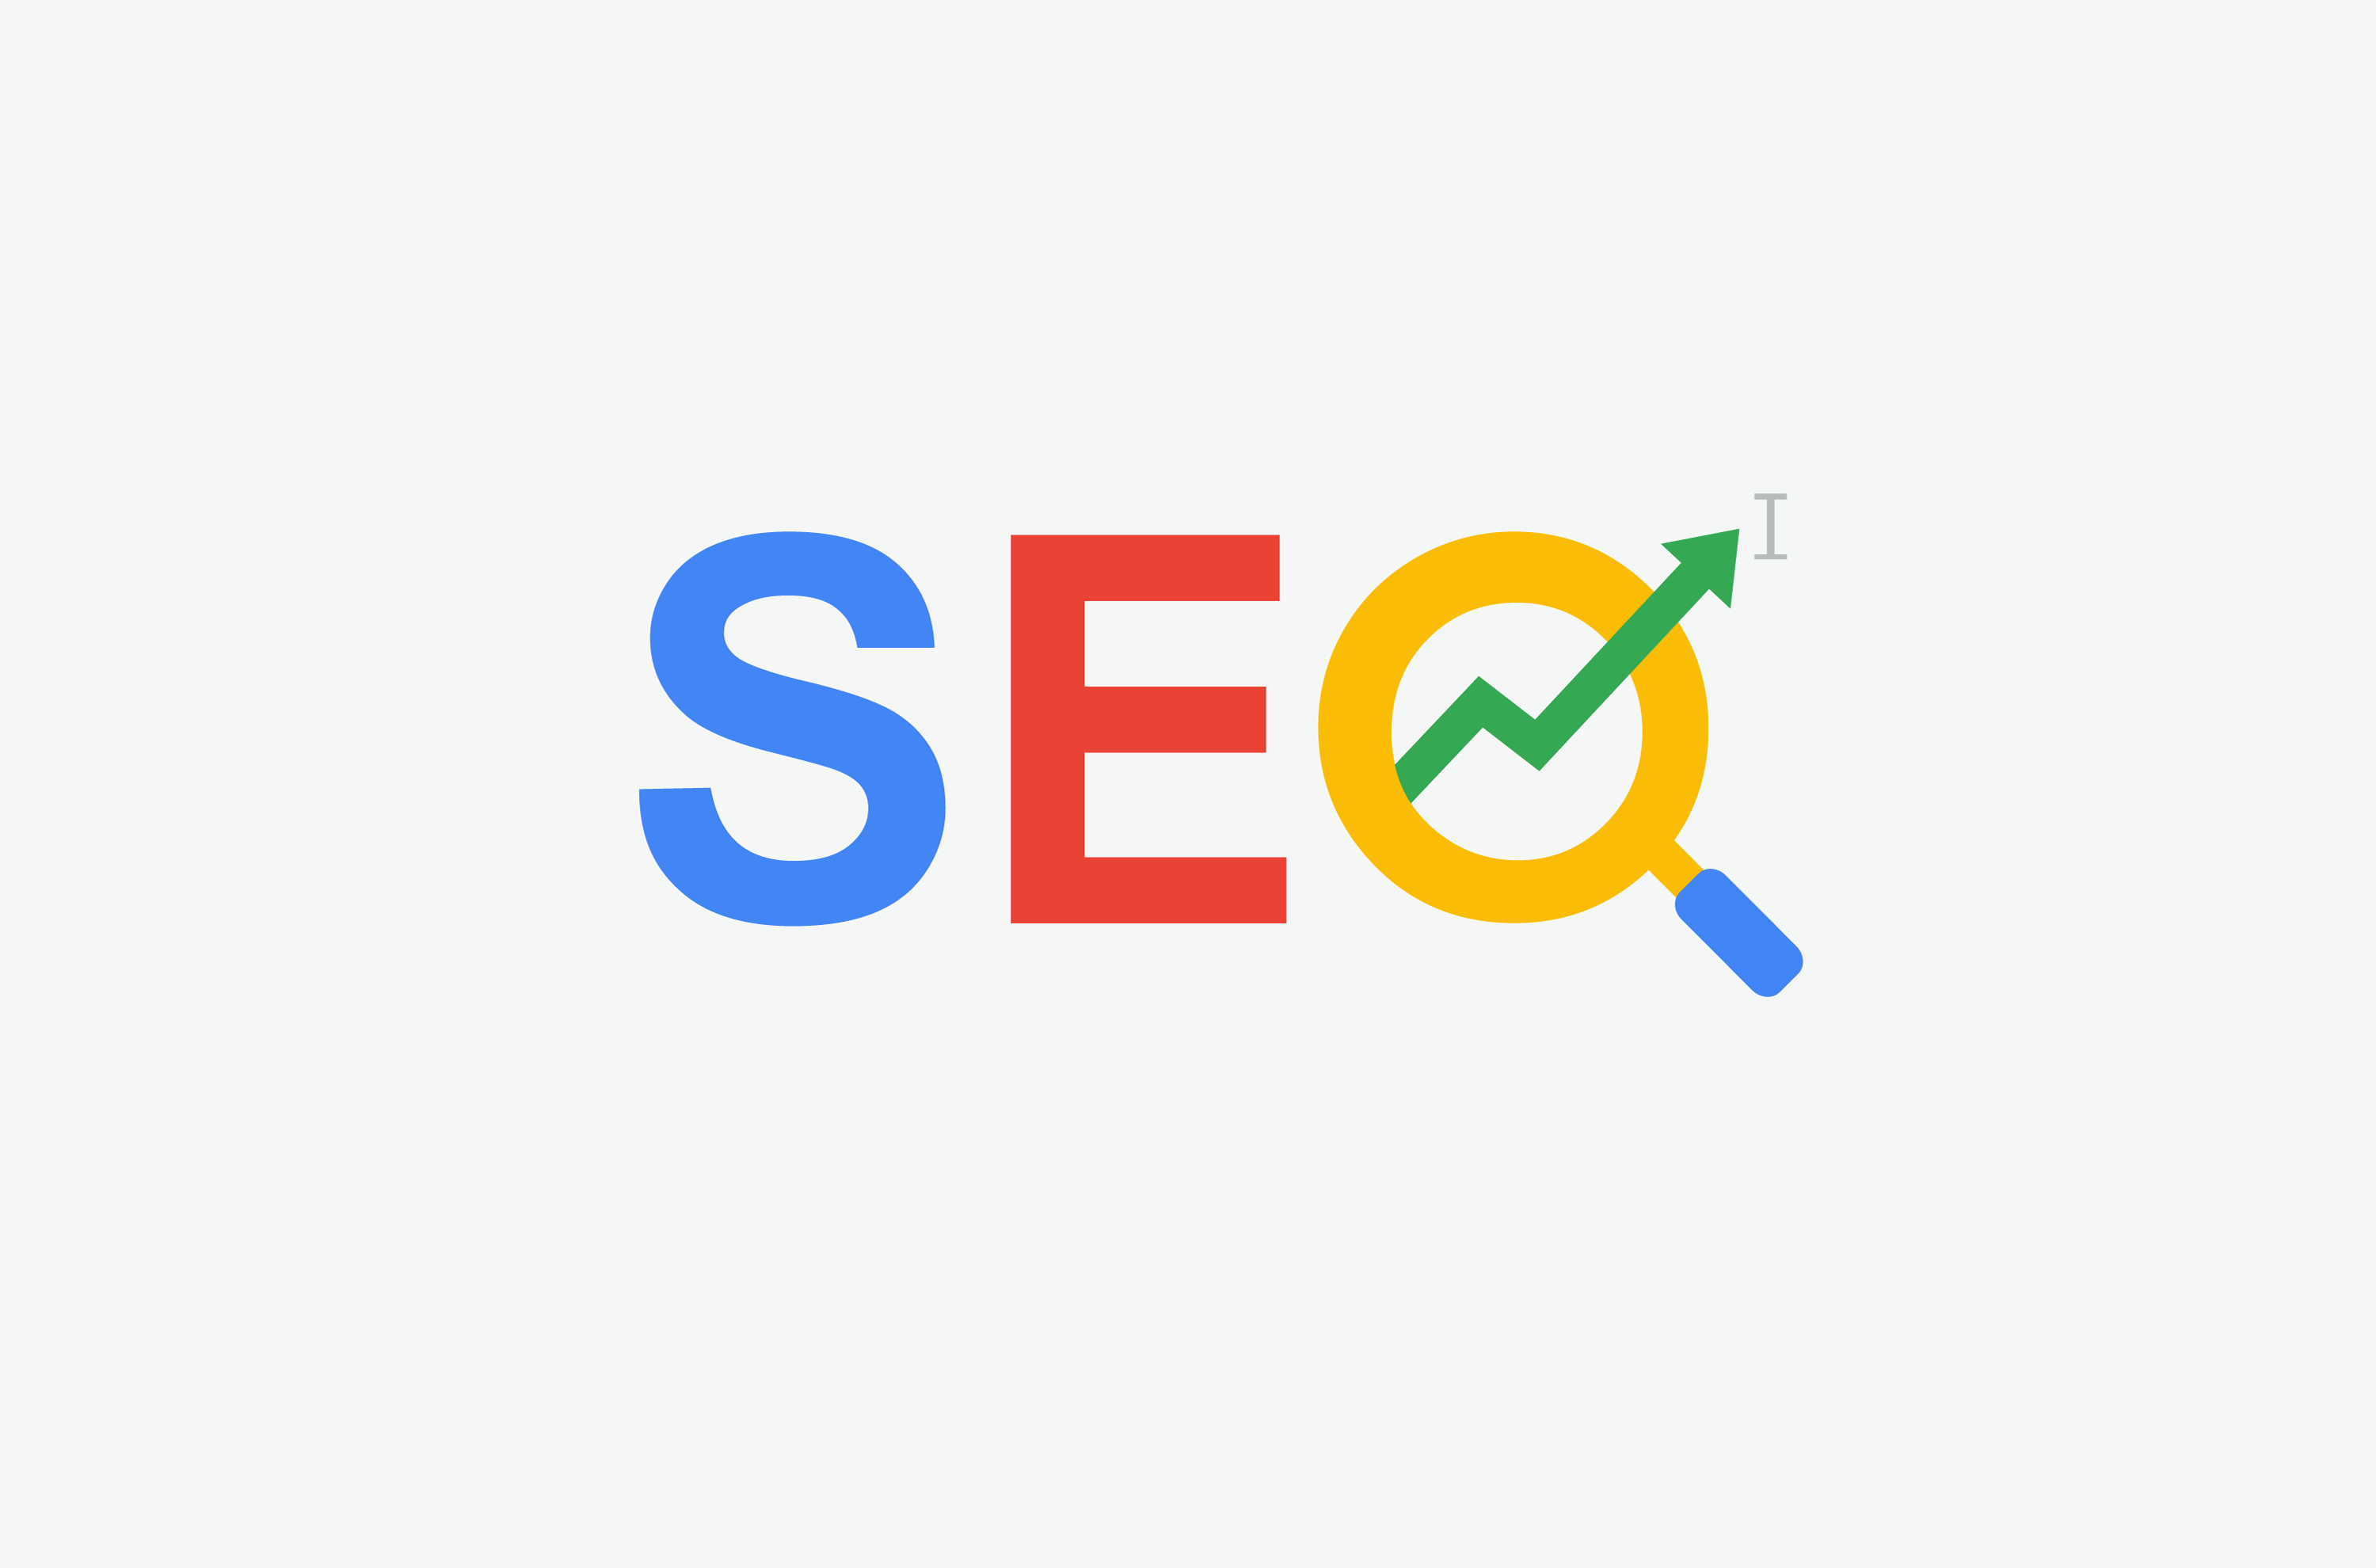 SEO is the most effective way to reach your customers